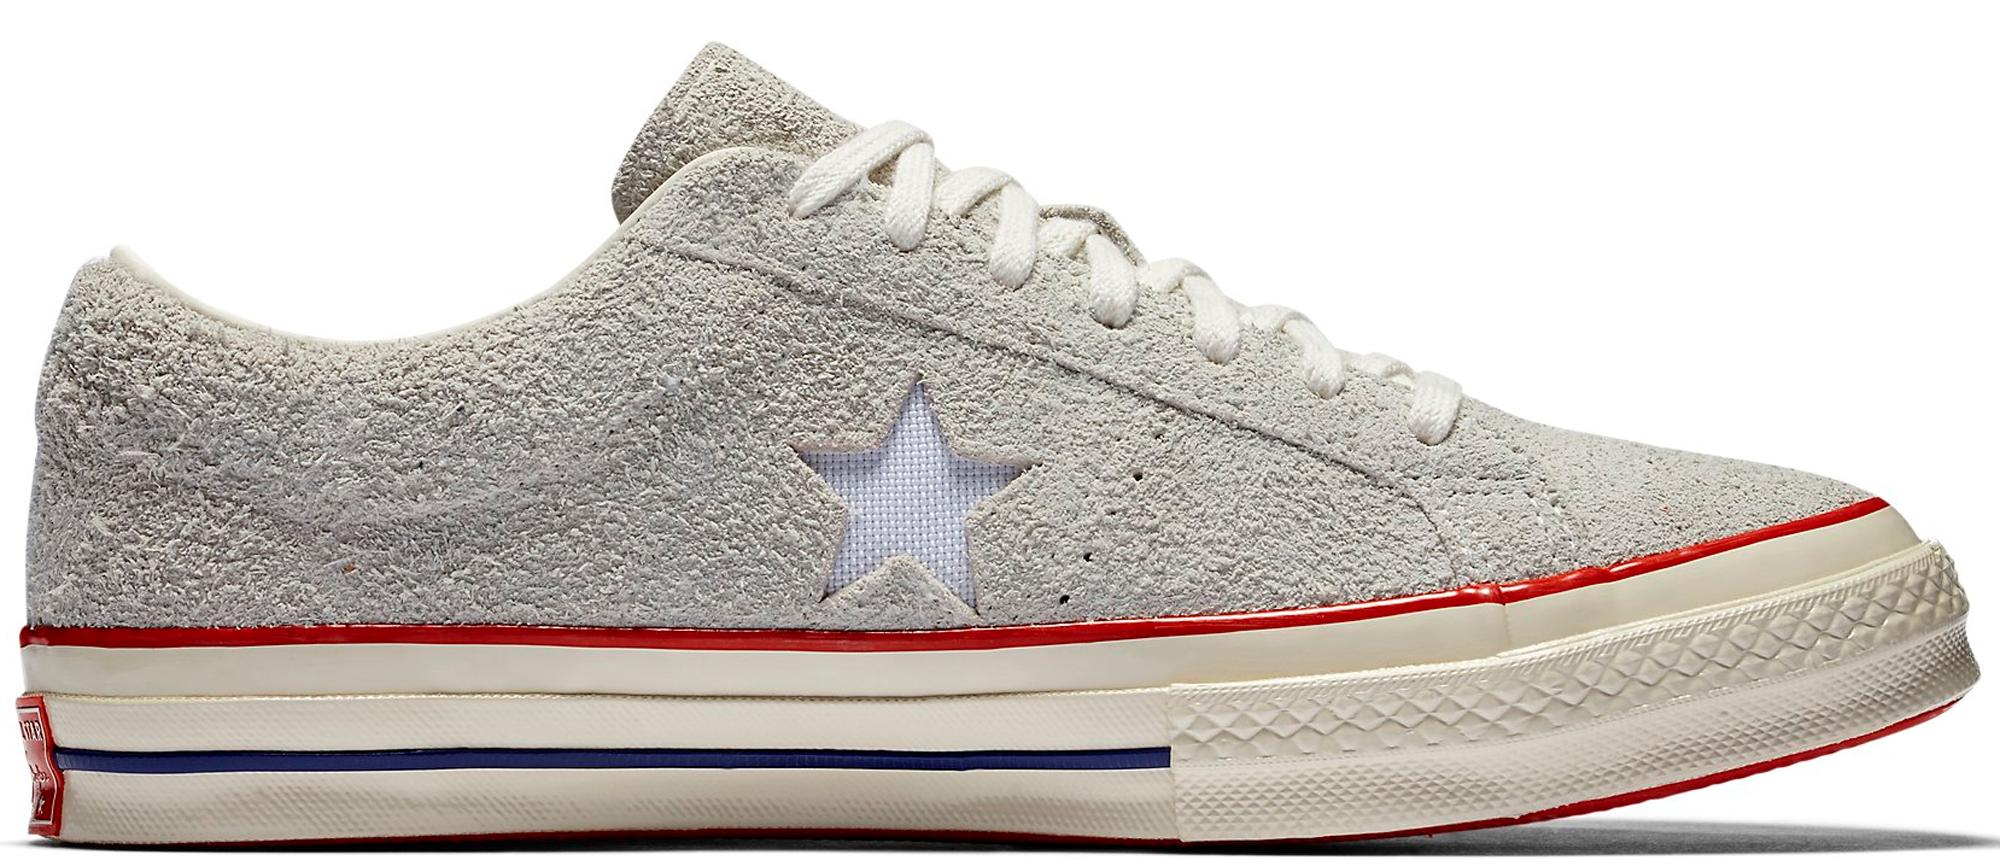 Undefeated x Converse One Star Ox White Suede